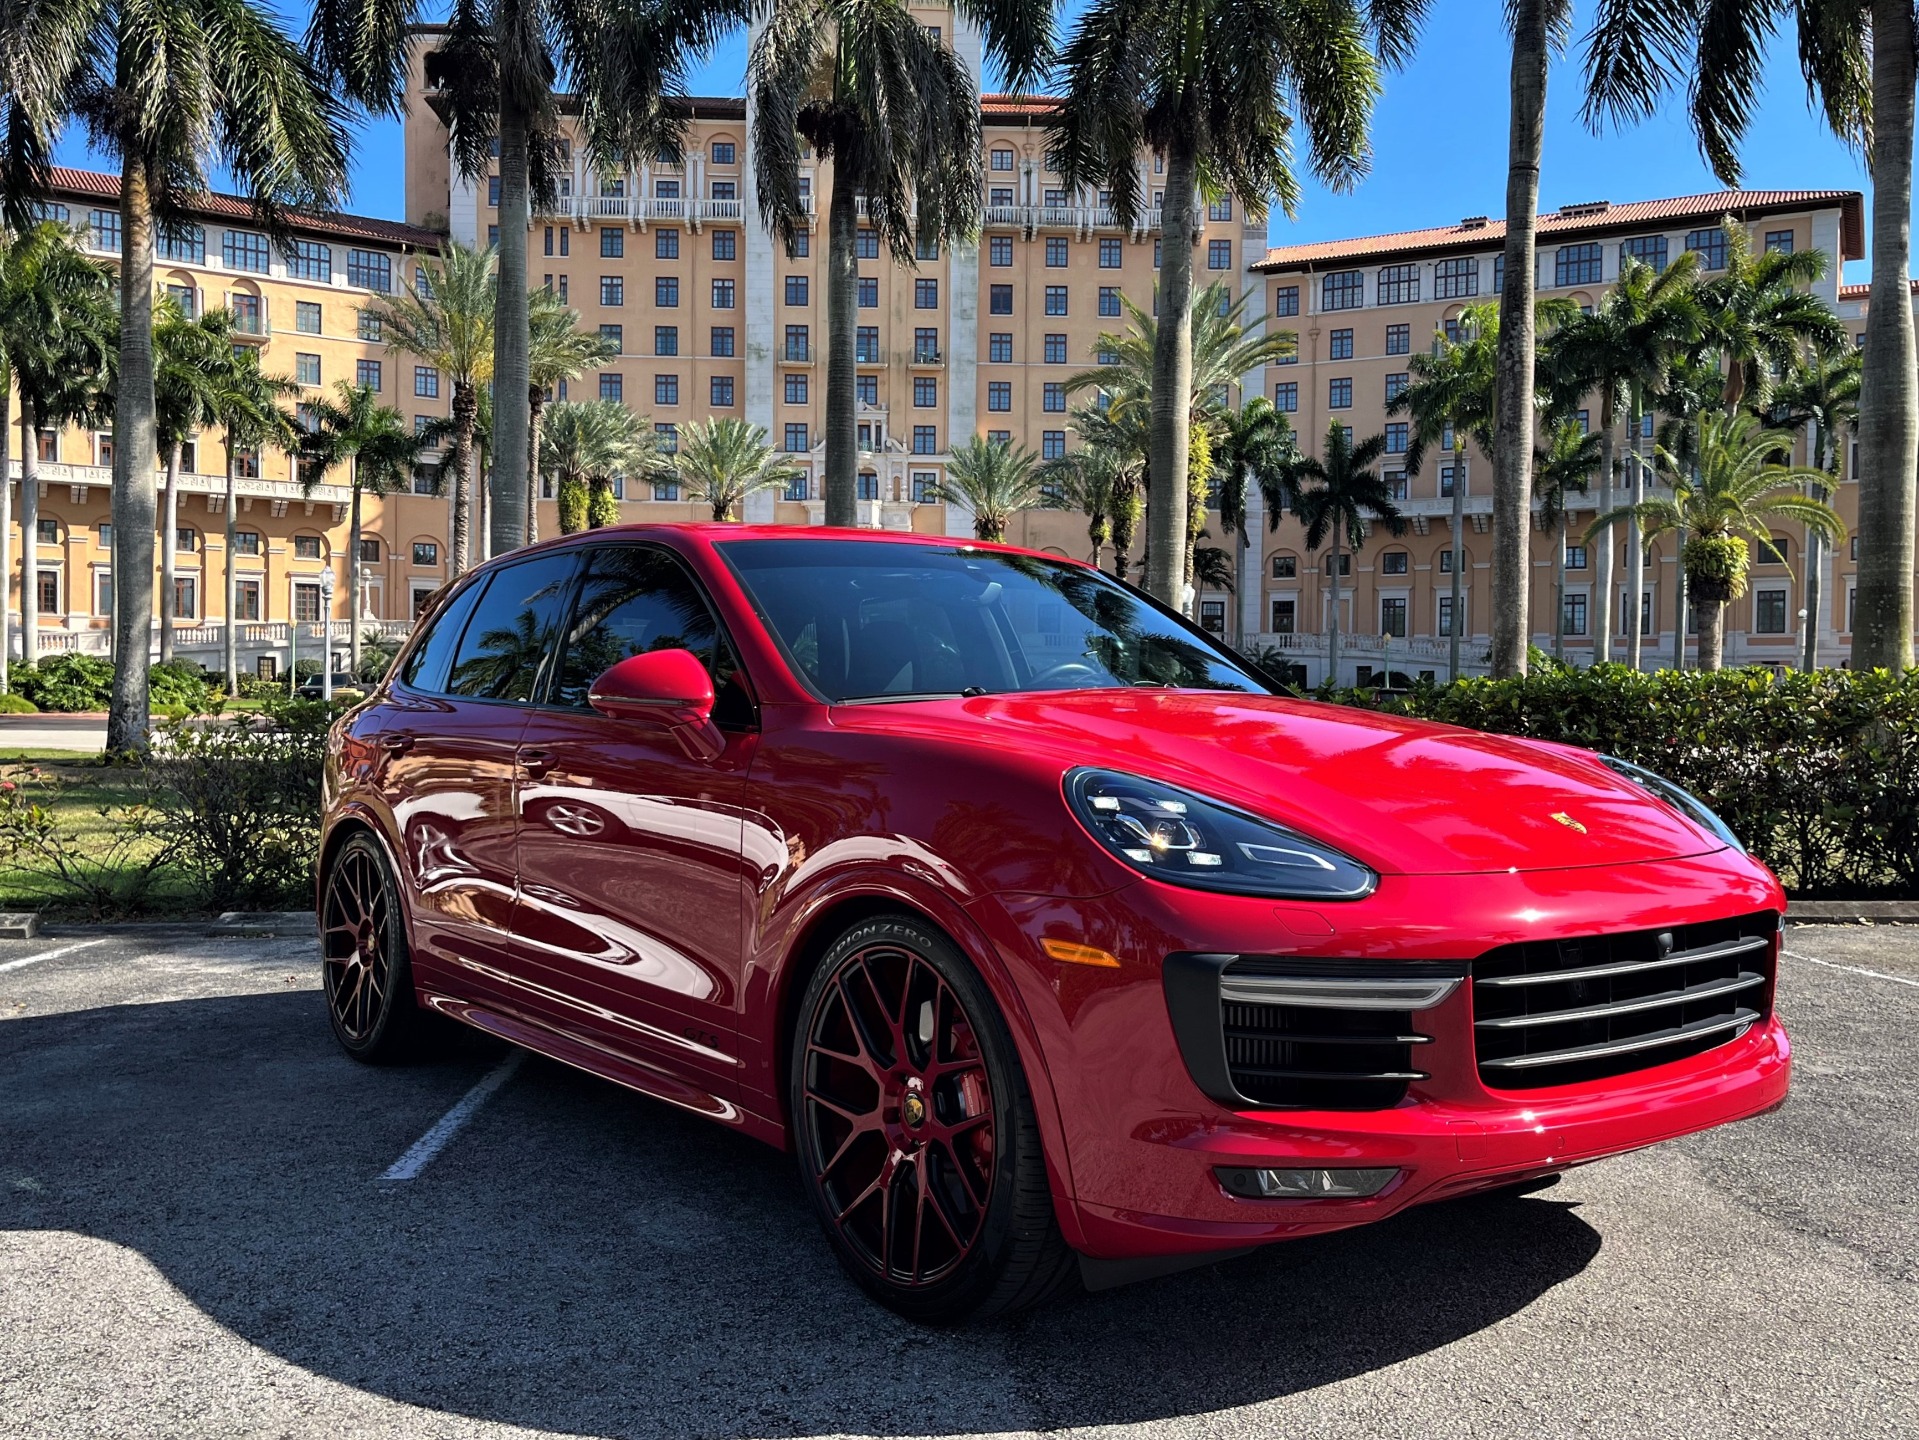 Used 2017 Porsche Cayenne GTS for sale Sold at The Gables Sports Cars in Miami FL 33146 1